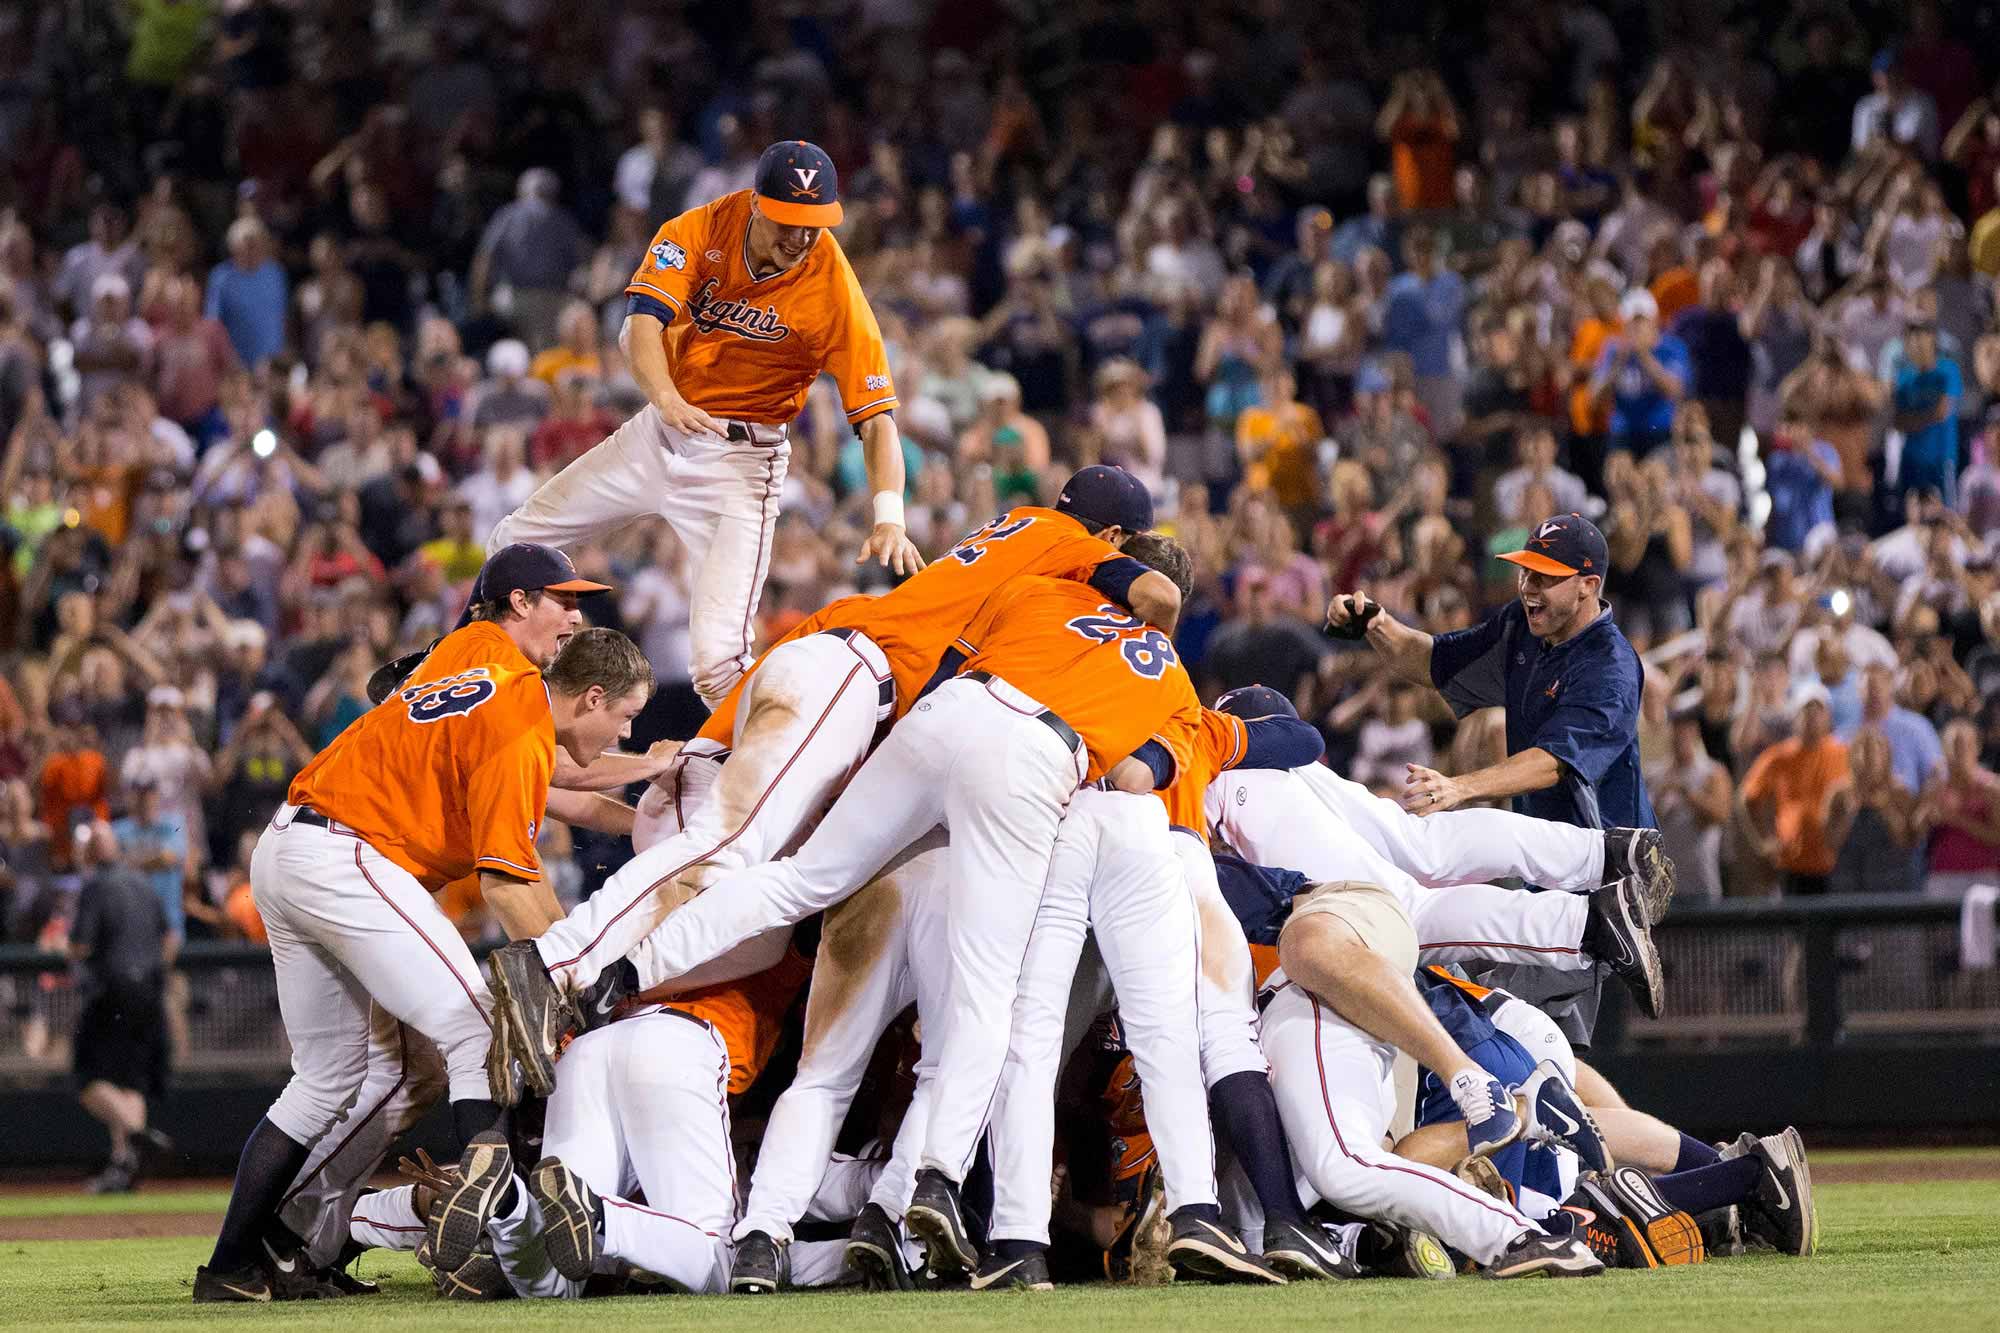 The UVA Baseball team celebrating together on the field aftert their national championship.